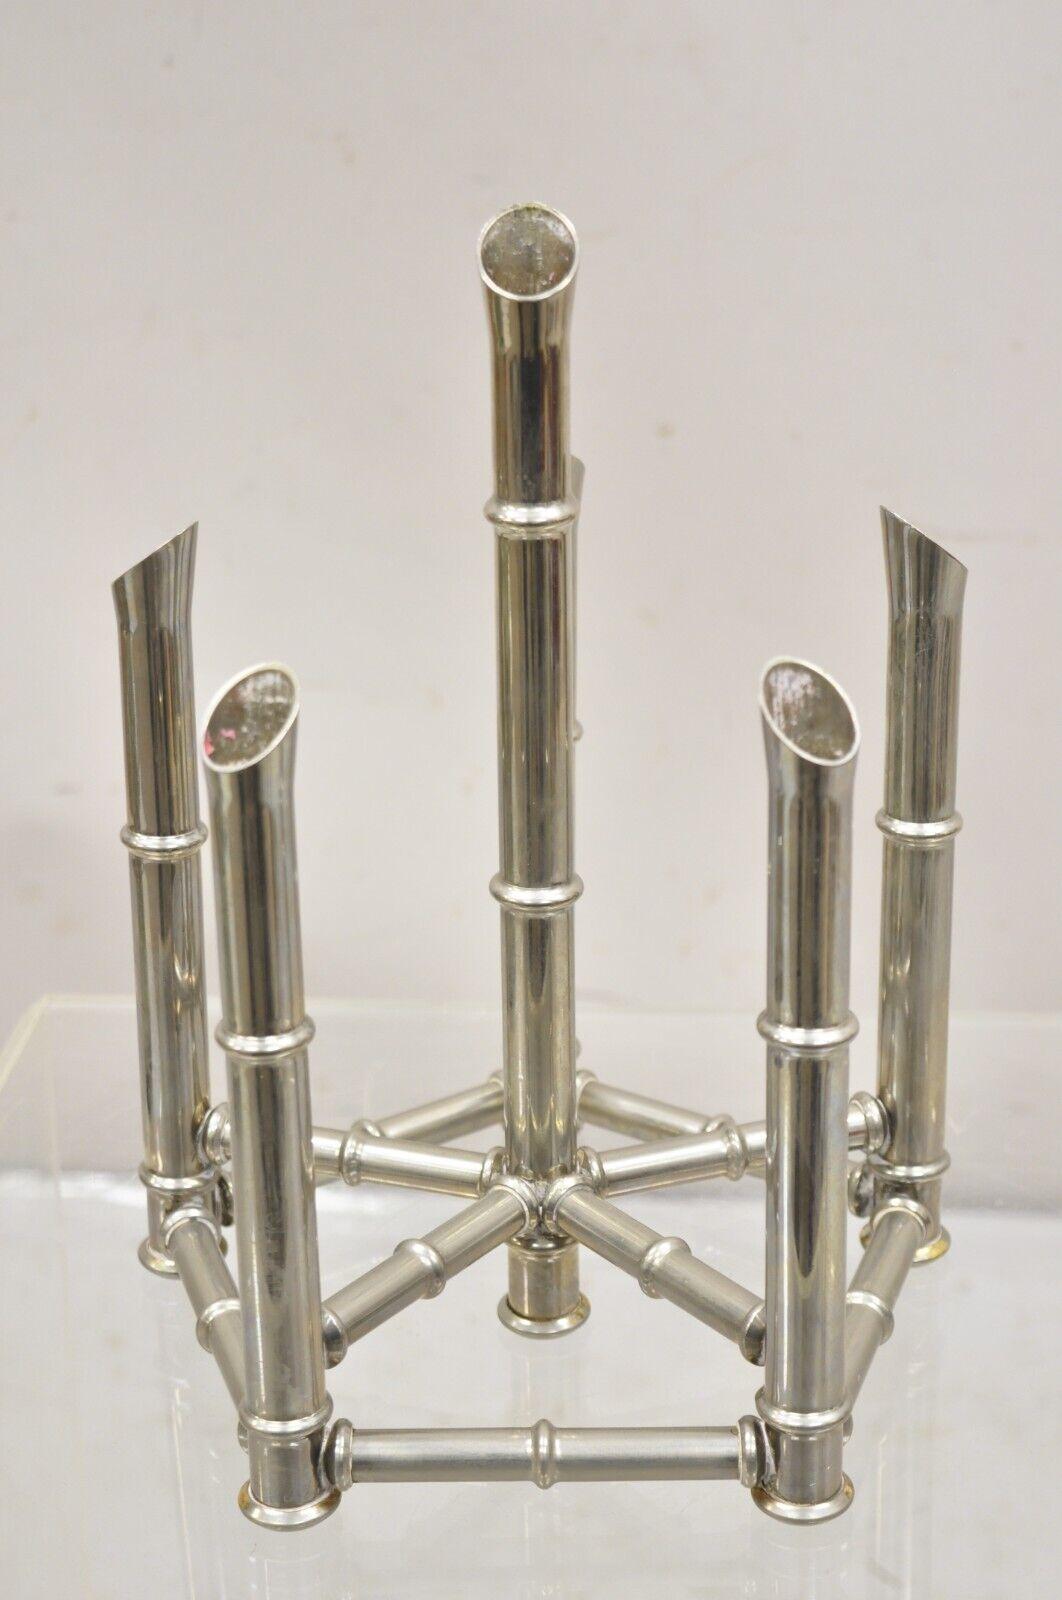 Hollywood Regency Silver Plated Chrome Faux Bamboo Candlestick Stands - a Pair For Sale 2